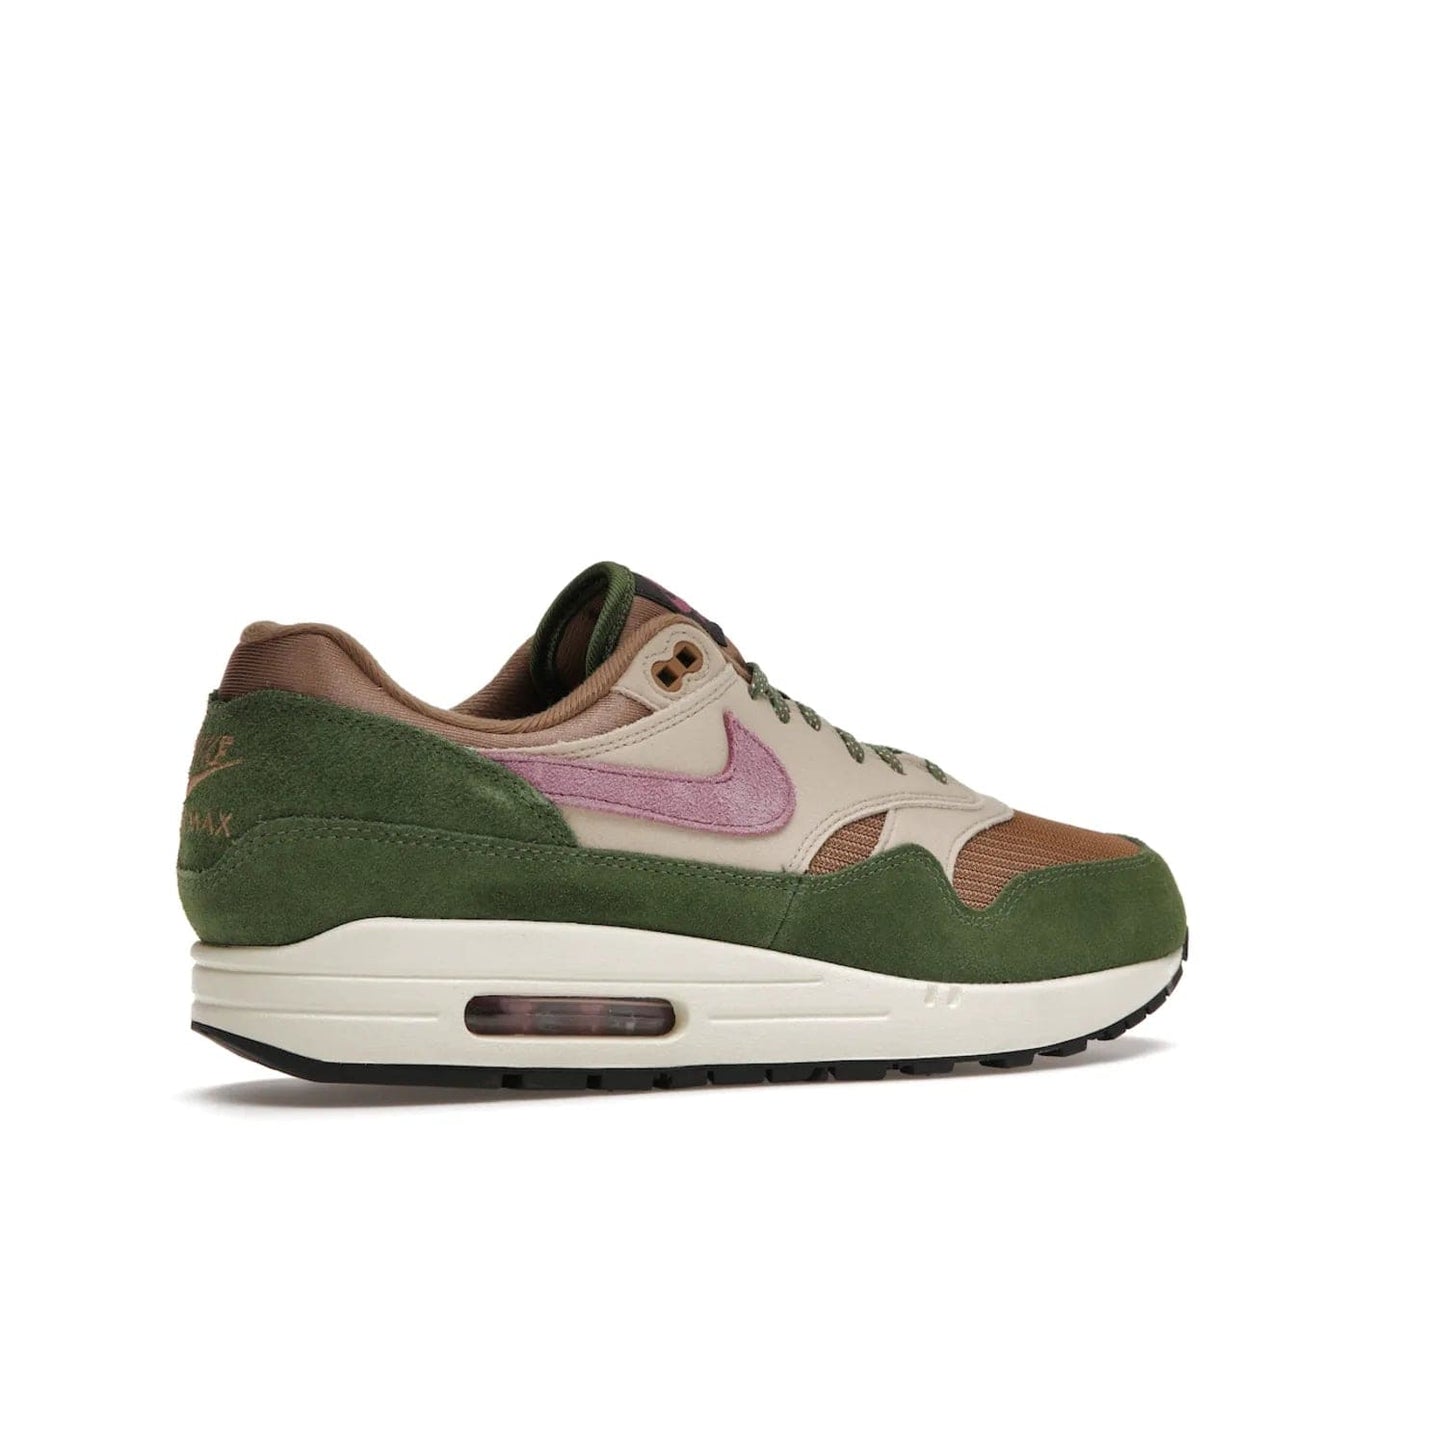 Nike Air Max 1 SH Treeline - Image 34 - Only at www.BallersClubKickz.com - A classic Nike Air Max 1 SH Treeline with a brown mesh upper, taupe Durabuck overlays, and hairy green suede details. Light Bordeaux Swoosh and woven tongue label for a pop of color. Released in May 2022. Perfect for any outfit and sure to impress.